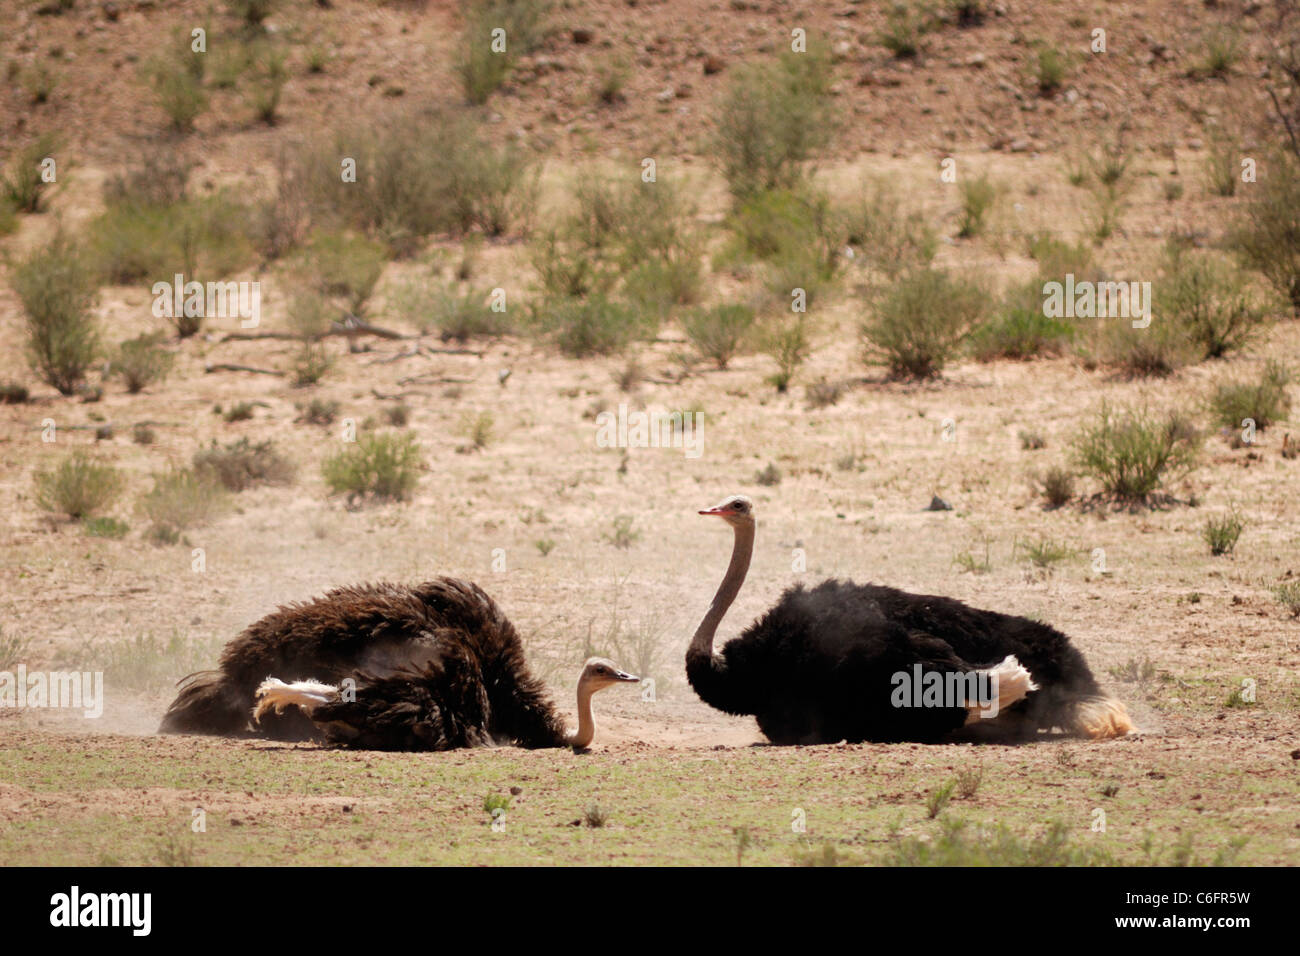 Common ostrich (Struthio camelus) pair dust bathing, Kgalagadi Transfrontier Park, South Africa Stock Photo